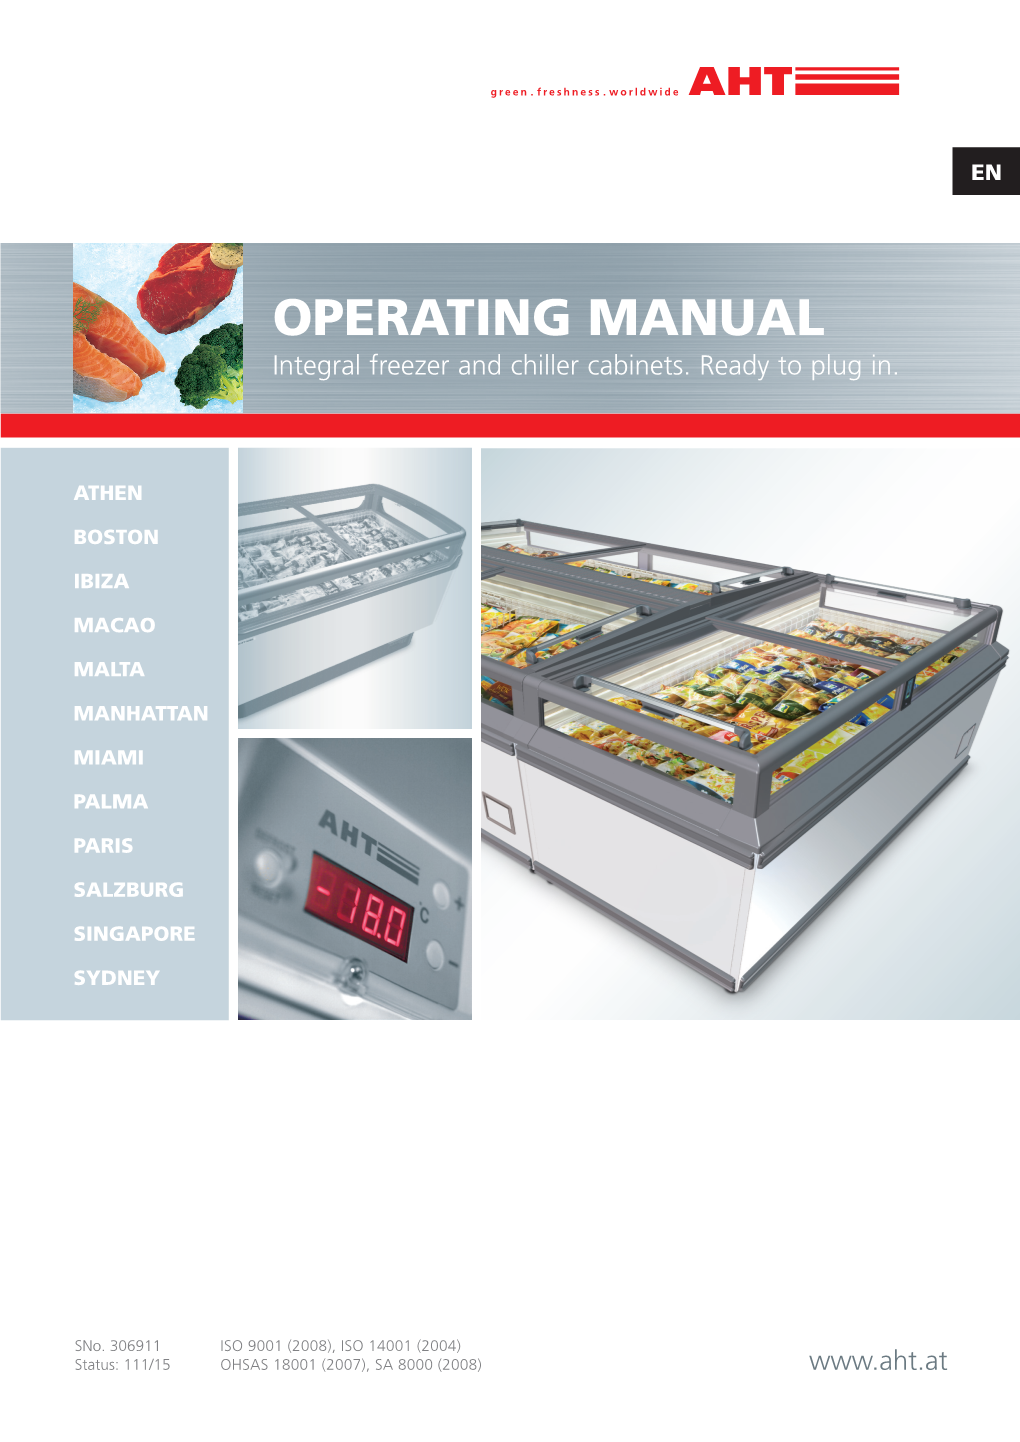 OPERATING MANUAL Integral Freezer and Chiller Cabinets